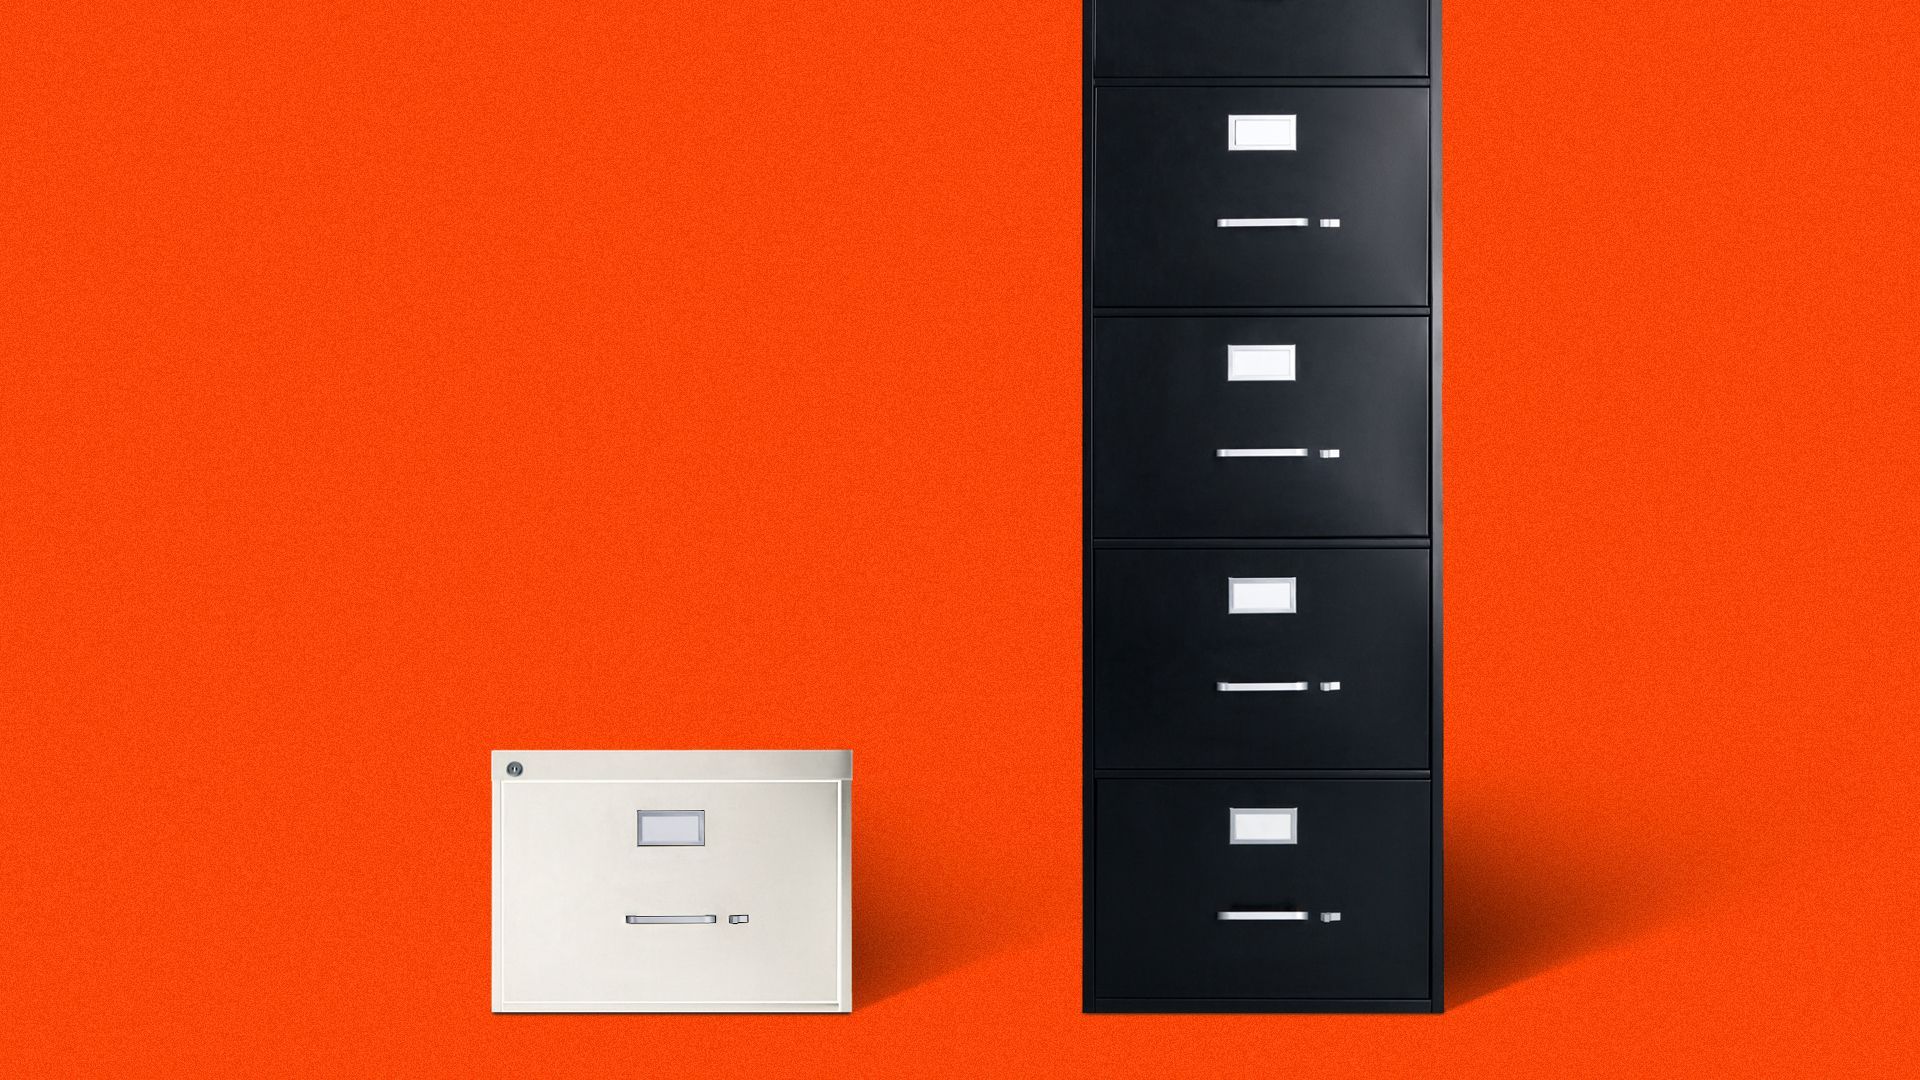 Illustration of a single while filing cabinet next to a stacked set of black filing cabinets